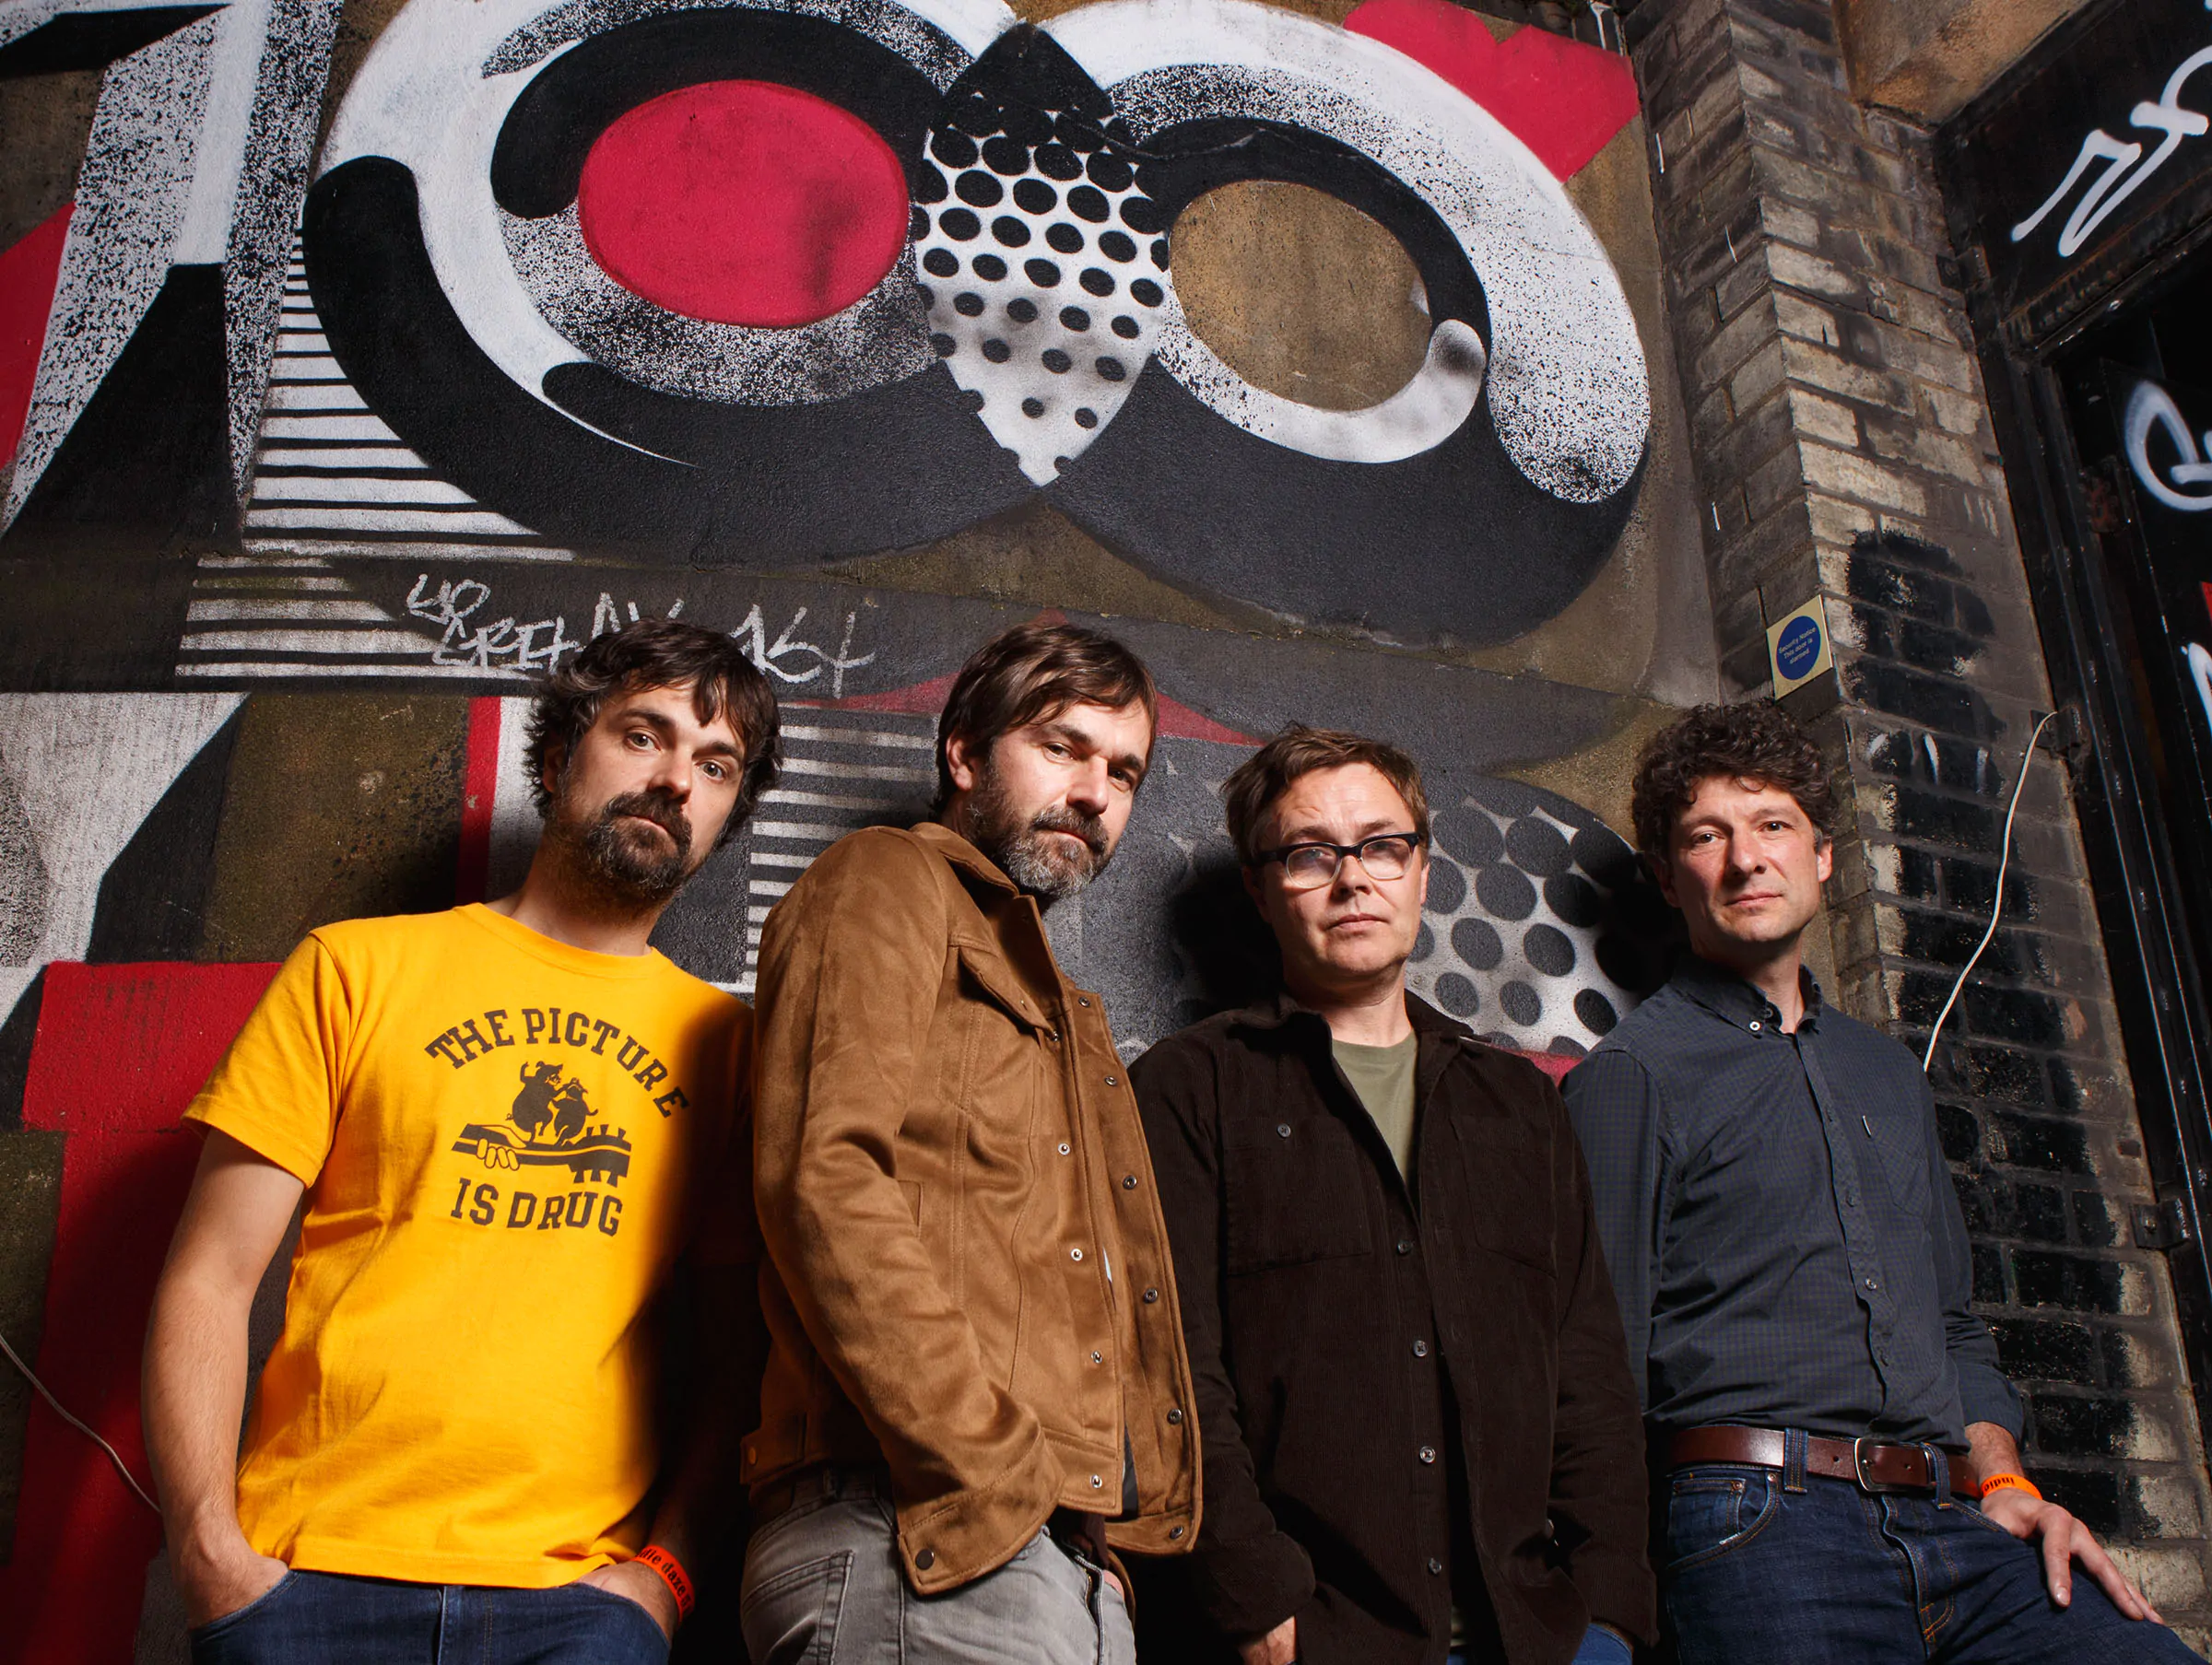 INTERVIEW: The Bluetones’ Mark Morriss on the 25th Anniversary of ‘Expecting To Fly’